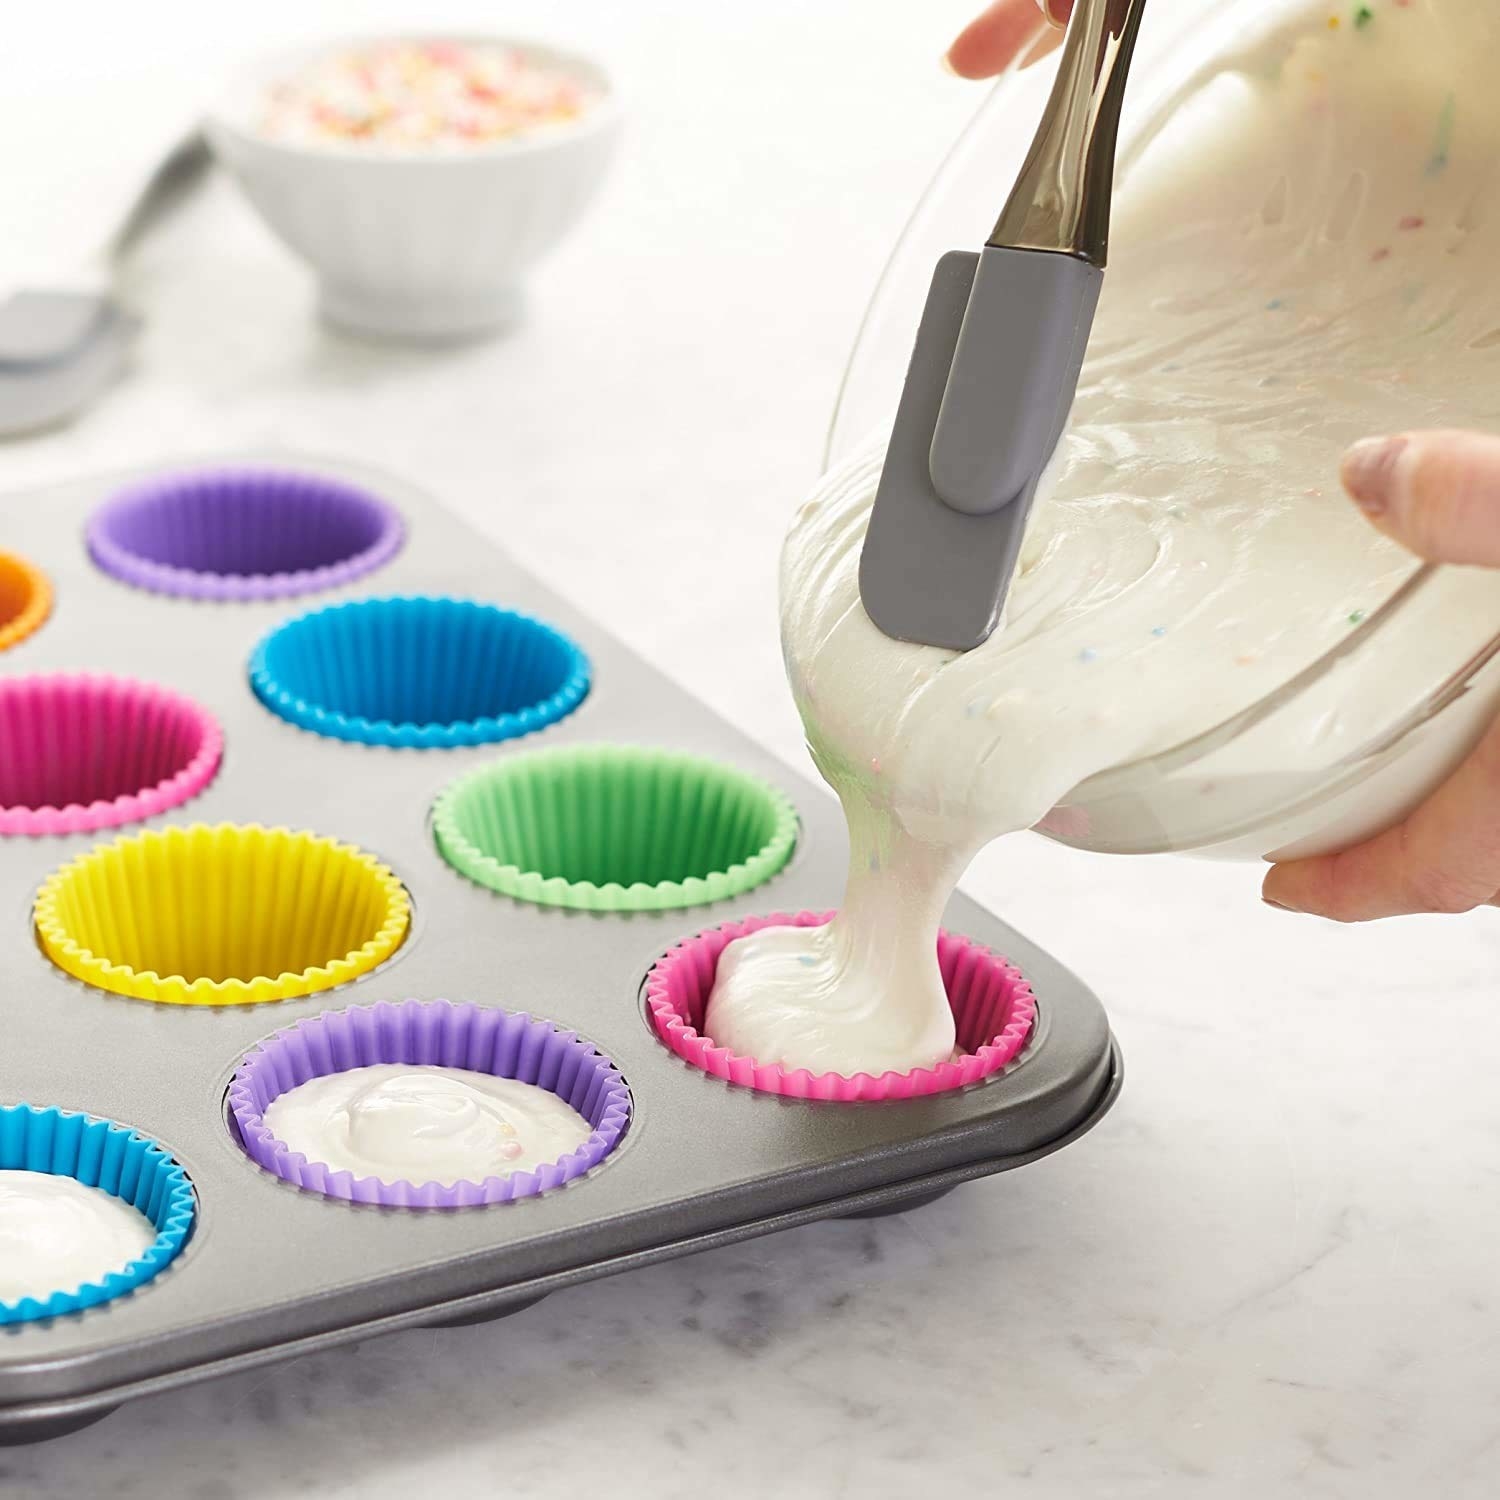 A person pouring cupcake batter into the liners.